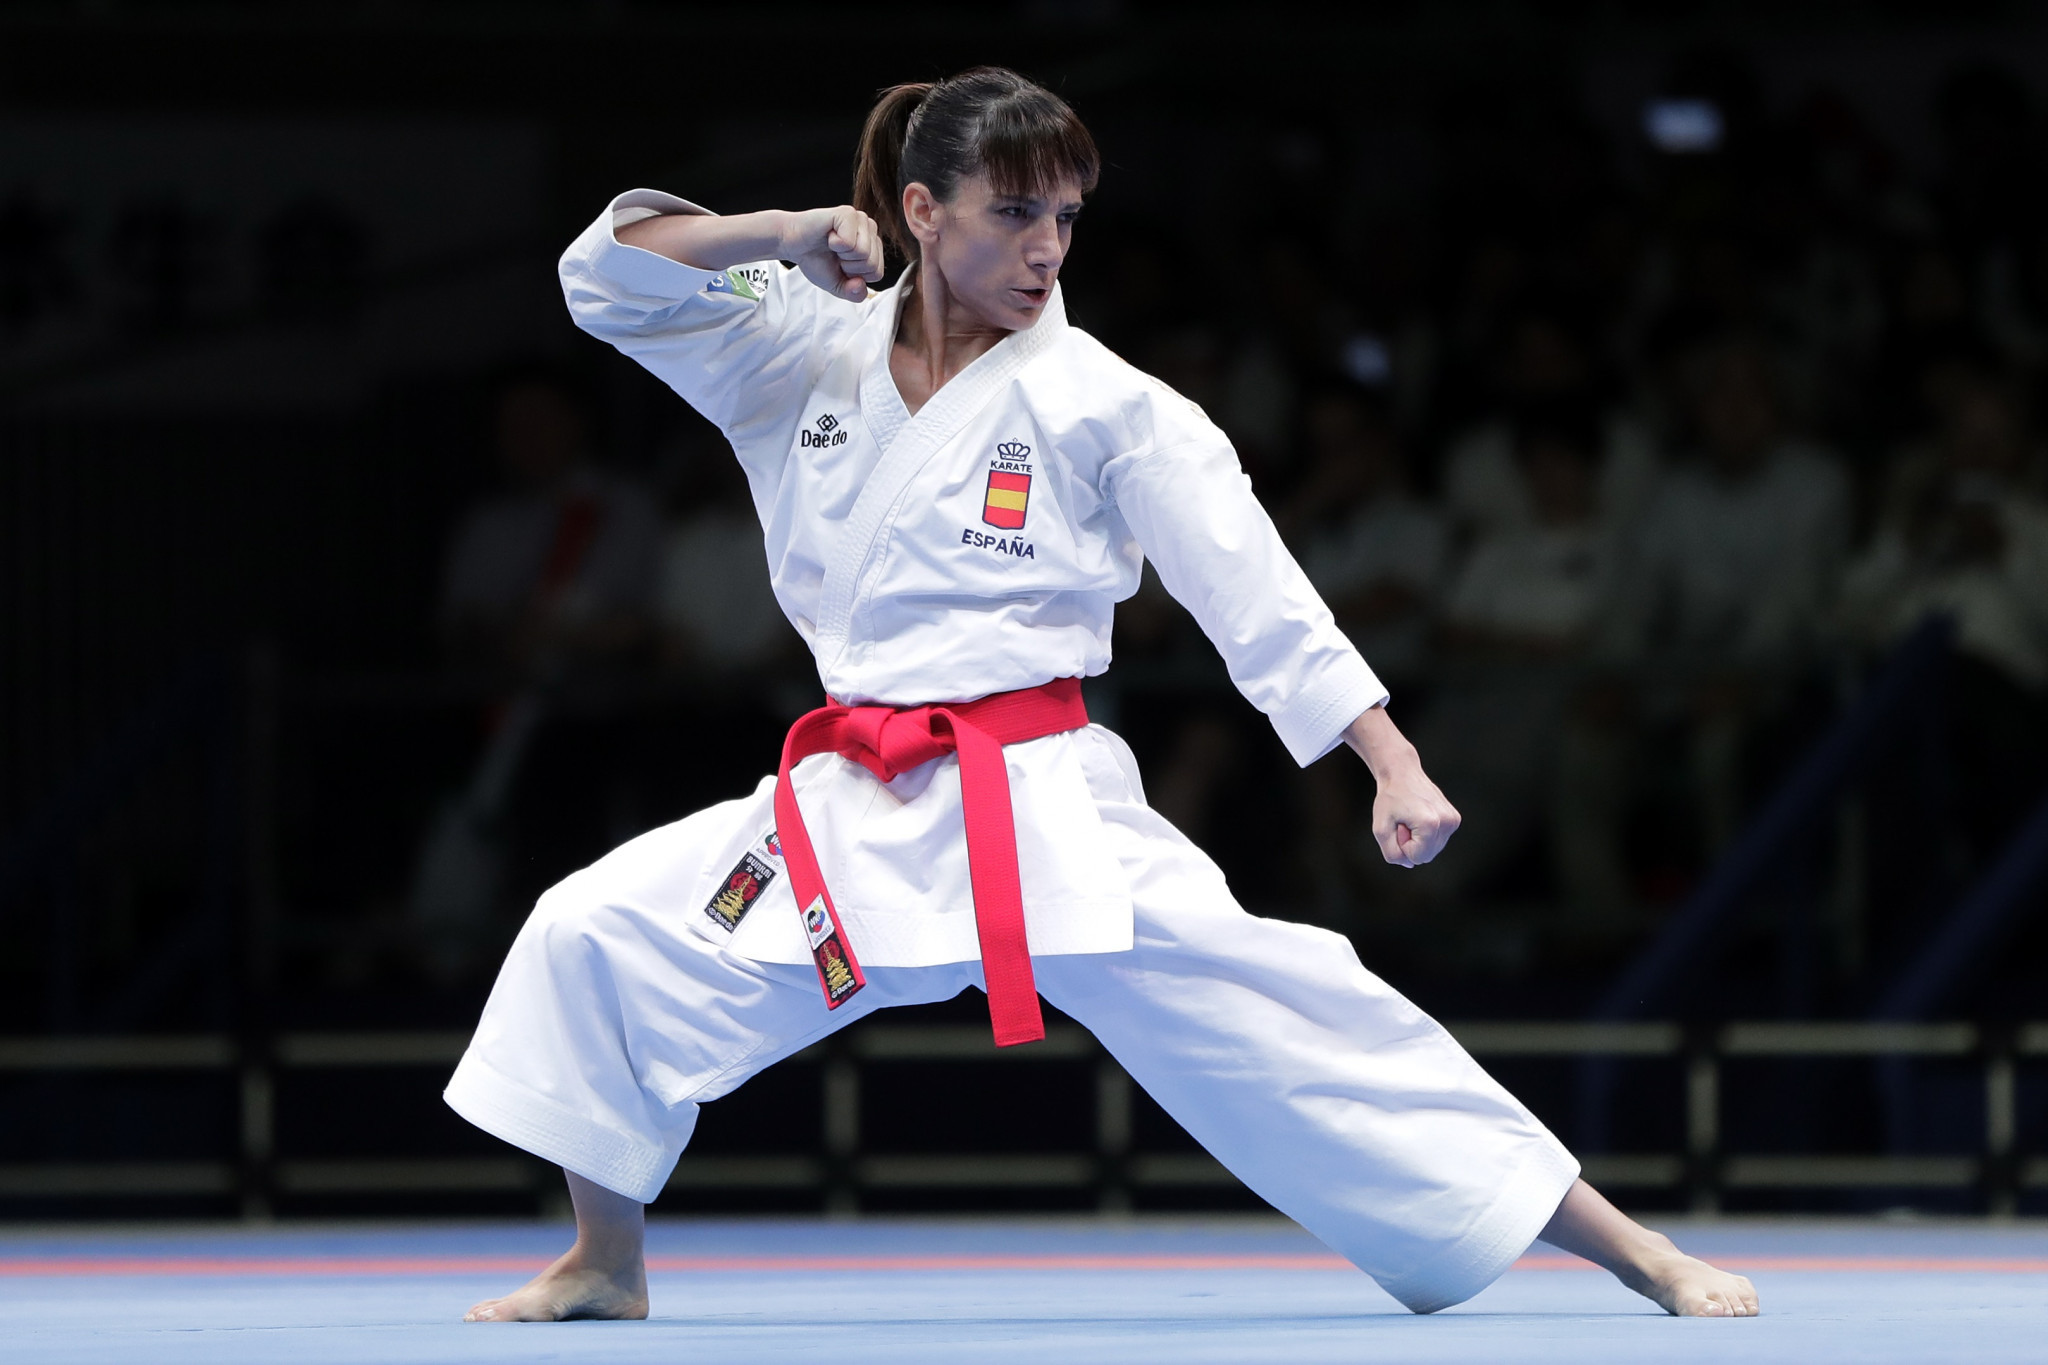 Sandra Sanchez is a gold medallist at the Birmingham 2022 World Games in karate, and is also an Olympic champion from Tokyo 2020 ©Getty Images